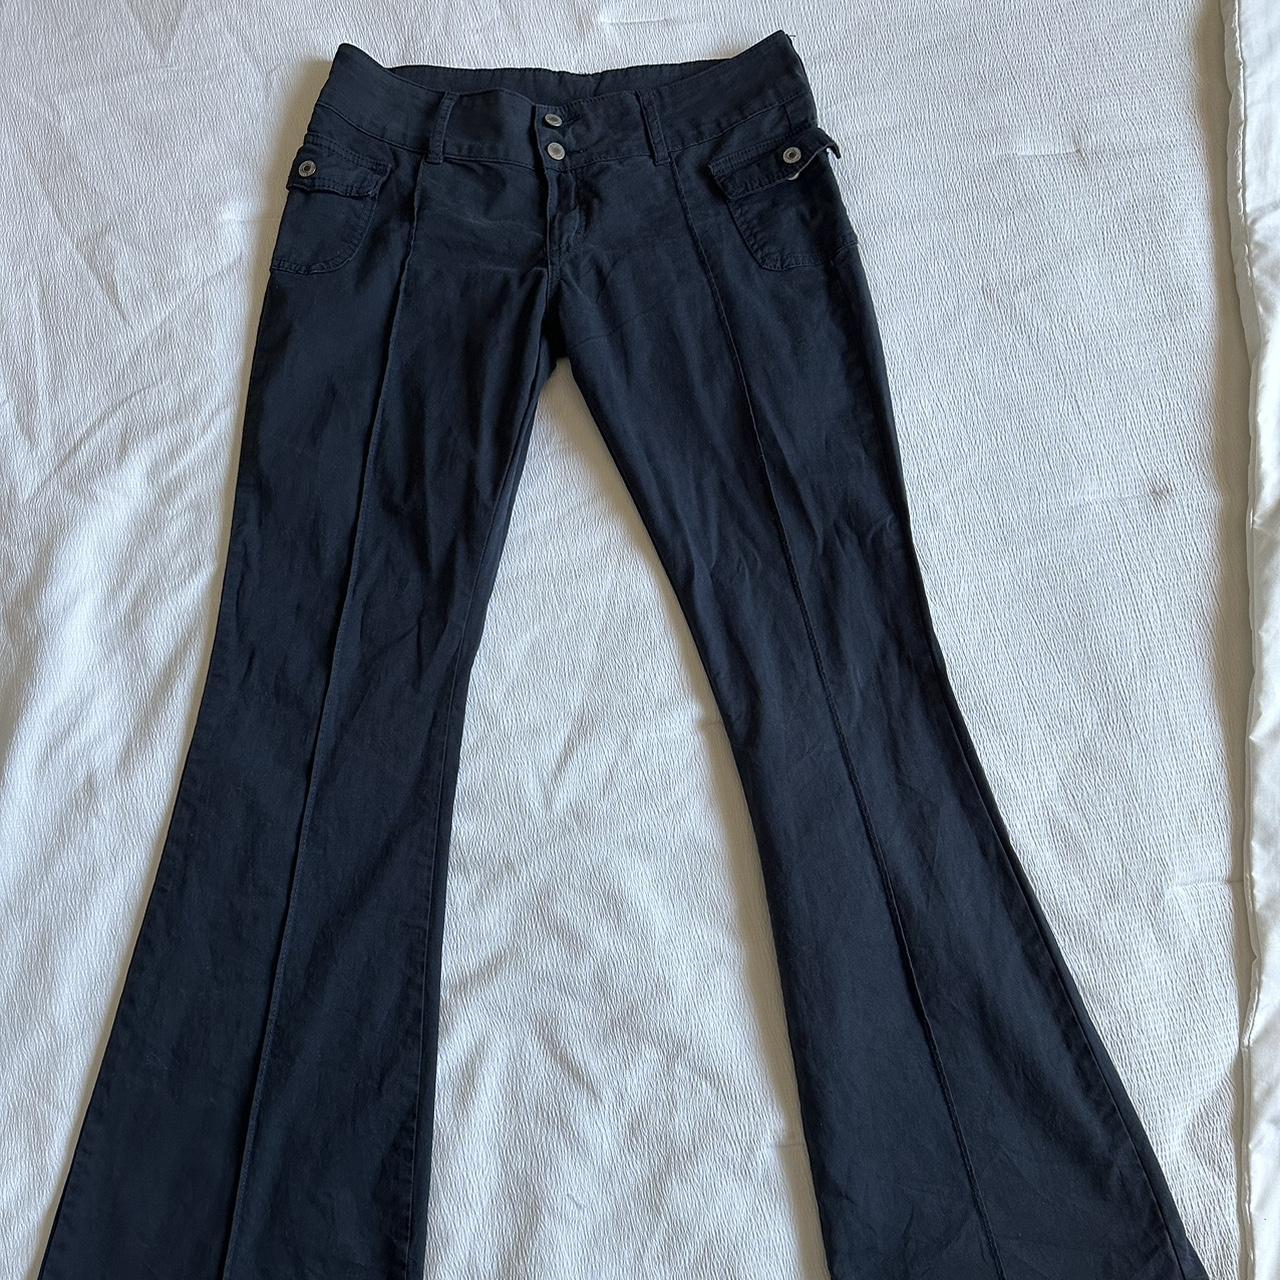 Brandy Melville Agatha jeans in navy blue. These are... - Depop